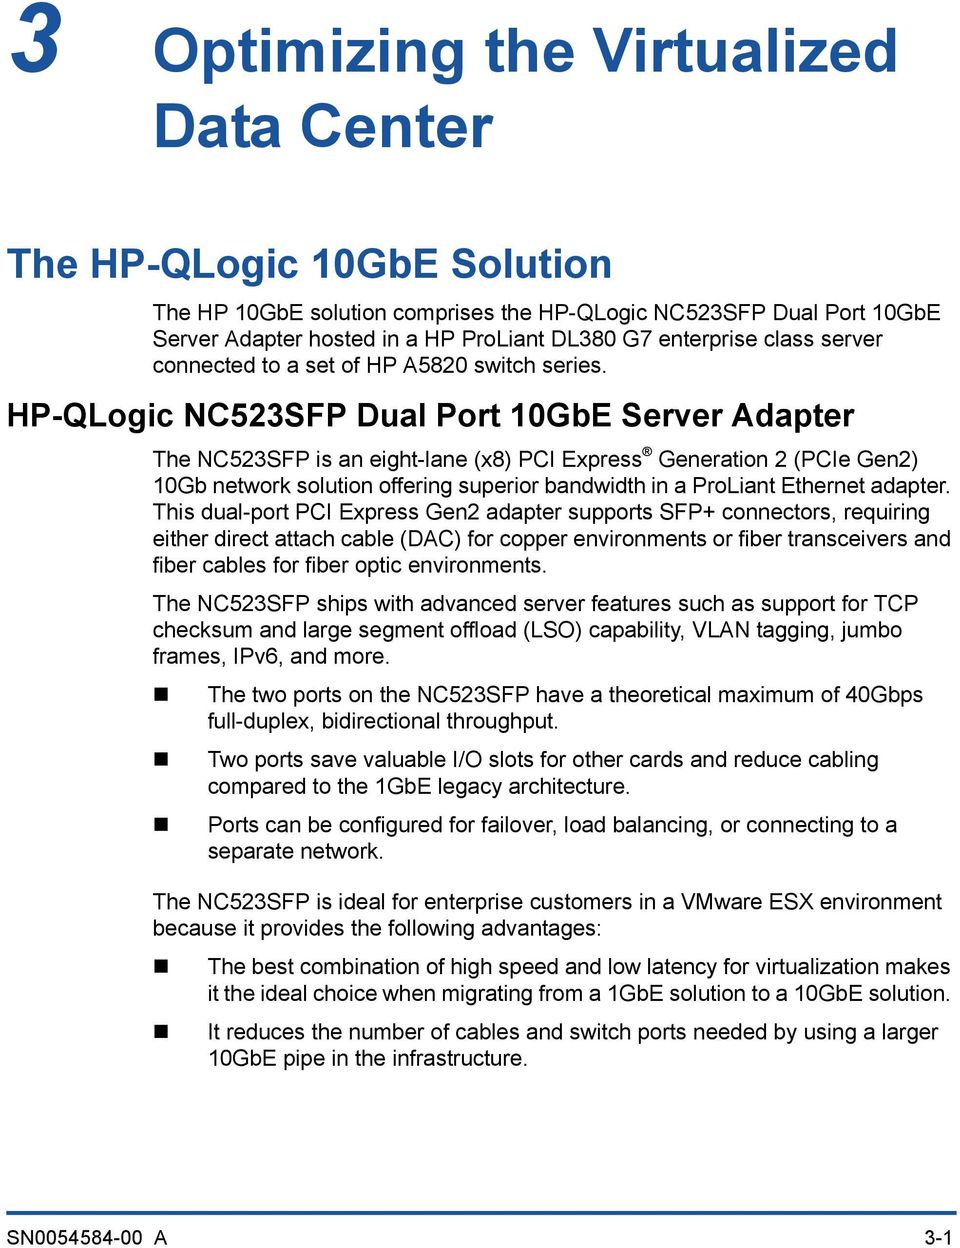 HP-QLogic NC523SFP Dual Port 10GbE Server Adapter The NC523SFP is an eight-lane (x8) PCI Express Generation 2 (PCIe Gen2) 10Gb network solution offering superior bandwidth in a ProLiant Ethernet